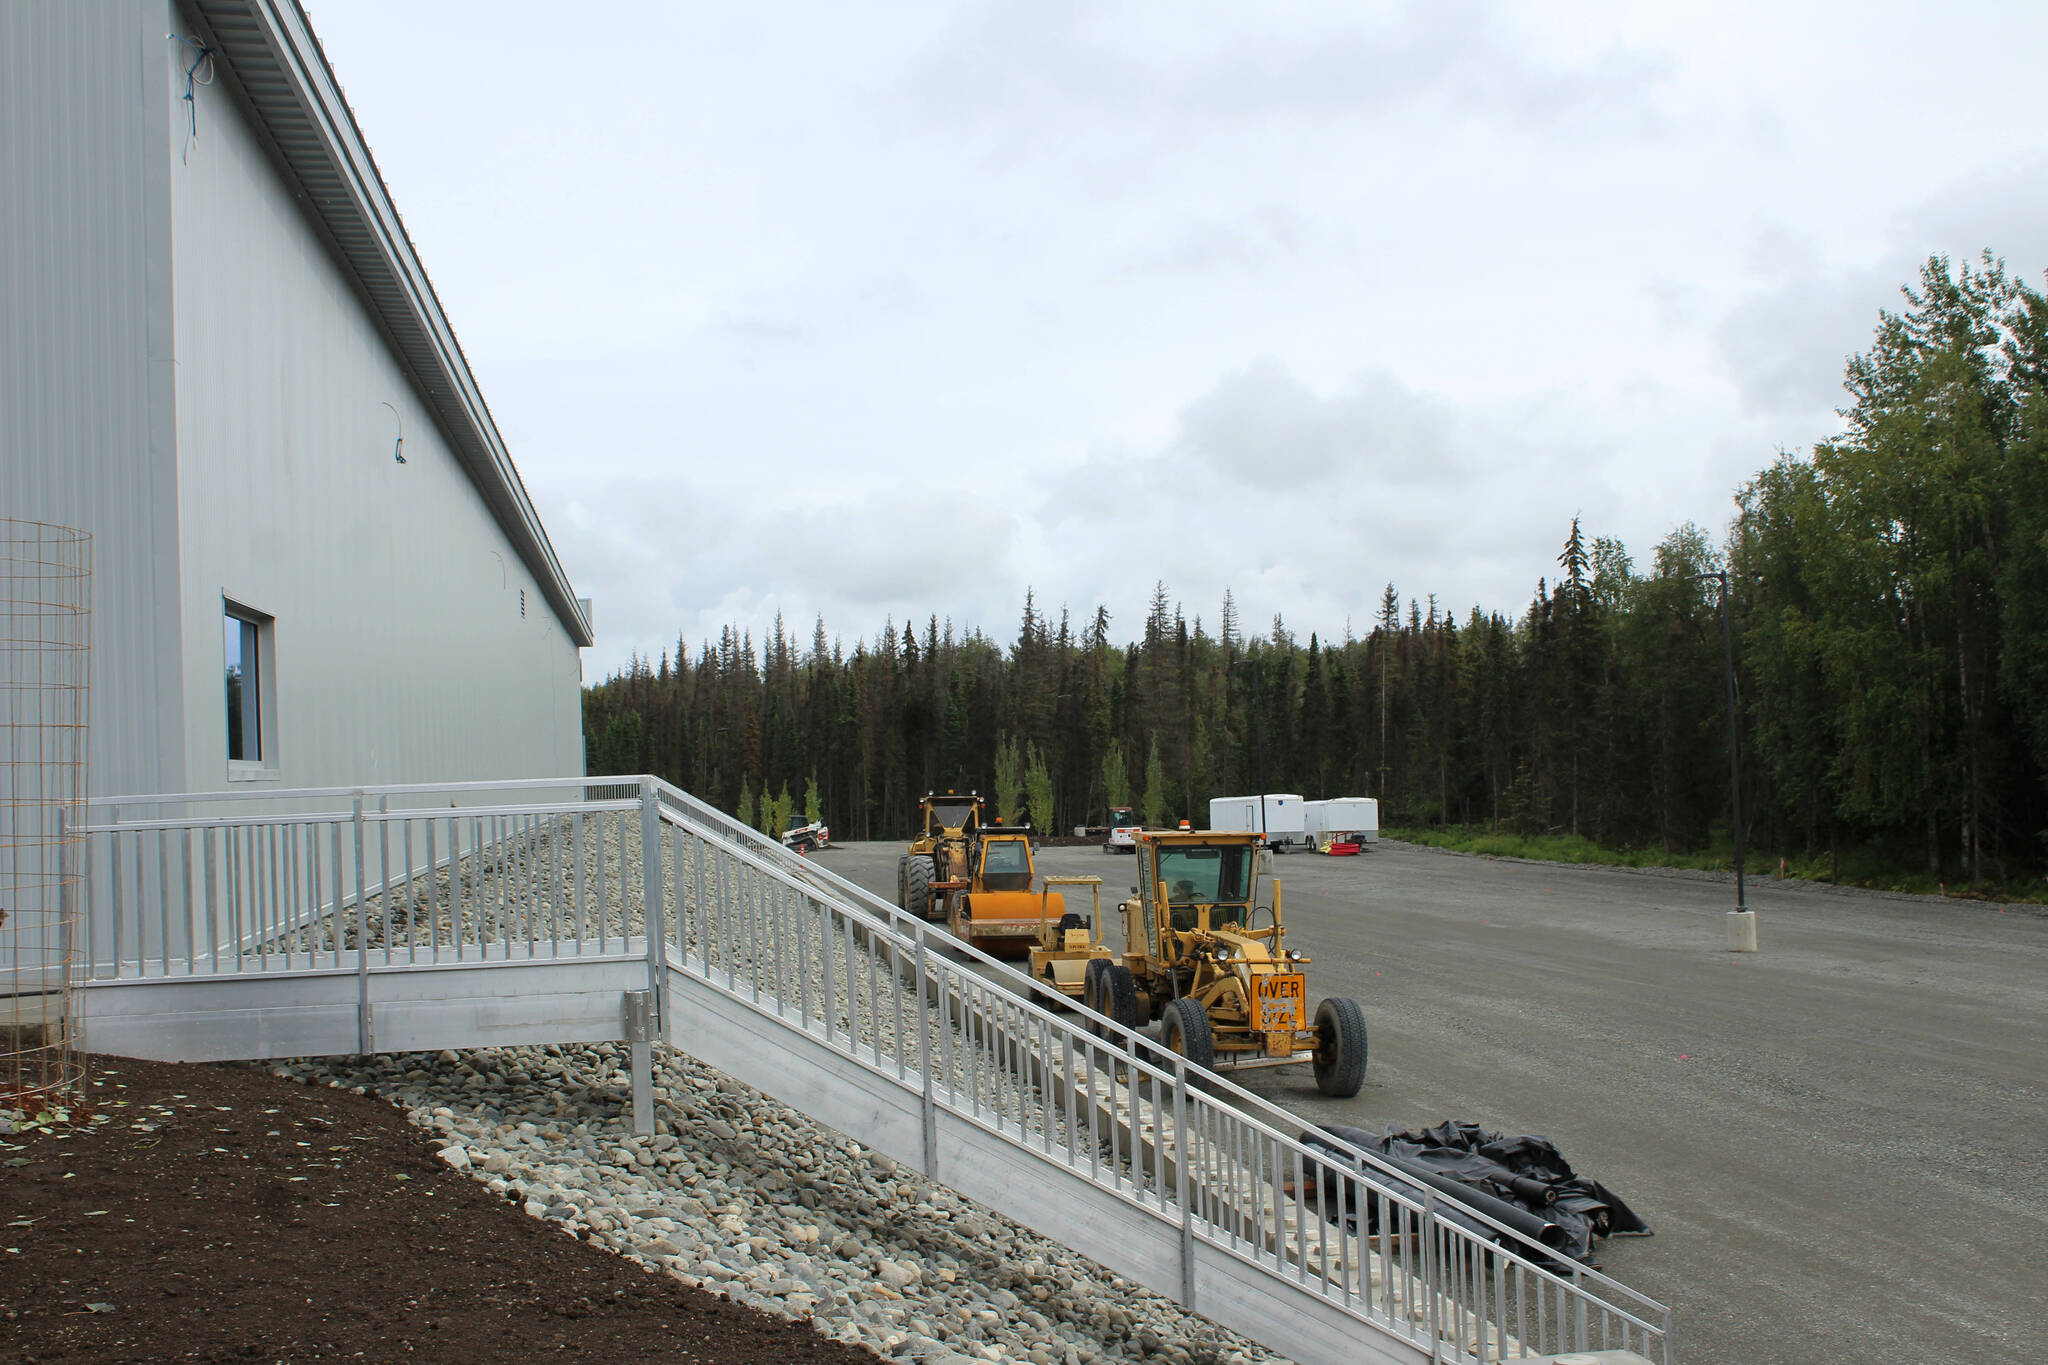 Bulldozers sit near newly leveled earth at Kendall’s new service facility and dealership on Wednesday, Aug. 17, 2023, in Soldotna, Alaska. (Ashlyn O’Hara/Peninsula Clarion)